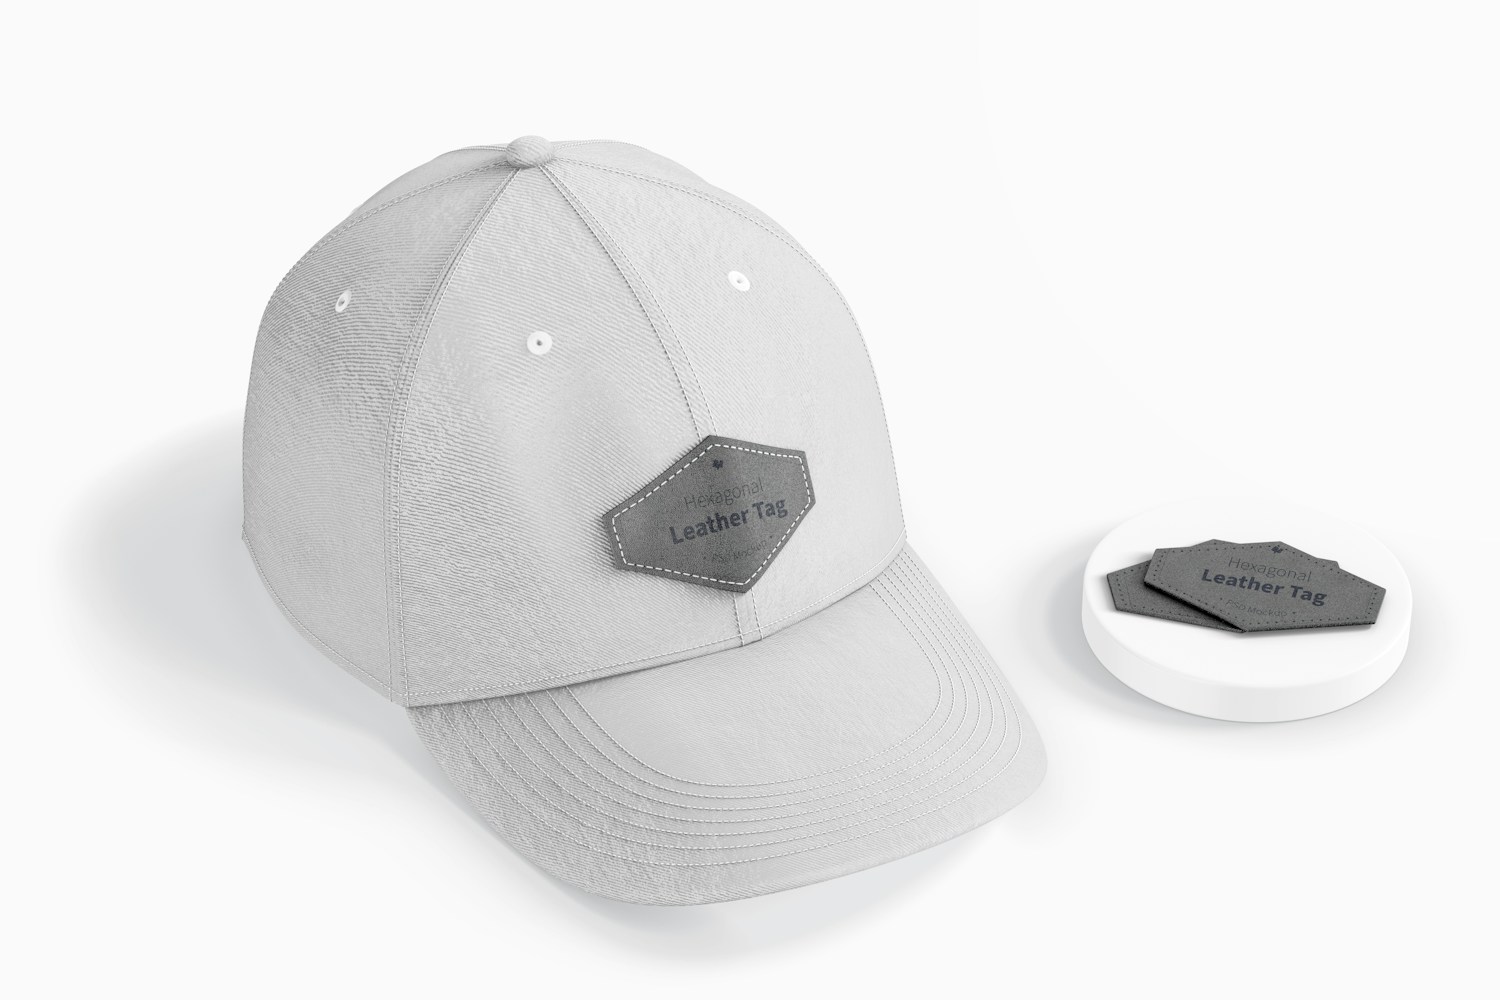 Hexagonal Leather Tags on Cap Mockup